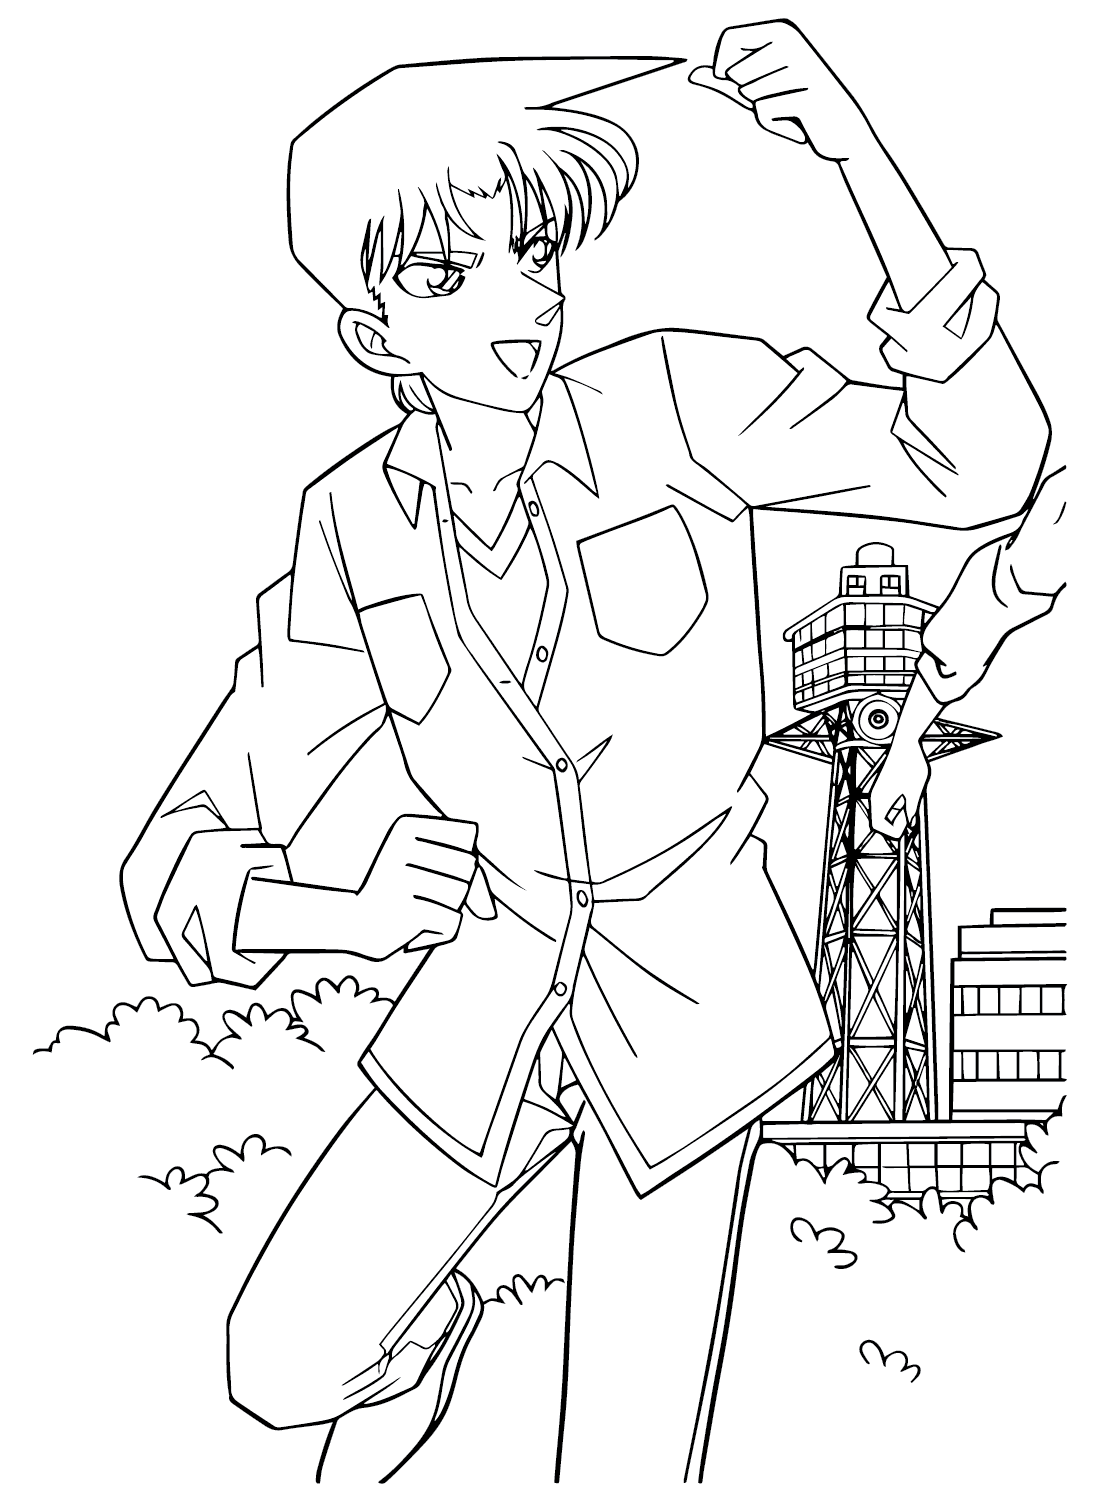 Hattori Heiji Coloring Pages to Printable from Hattori Heiji